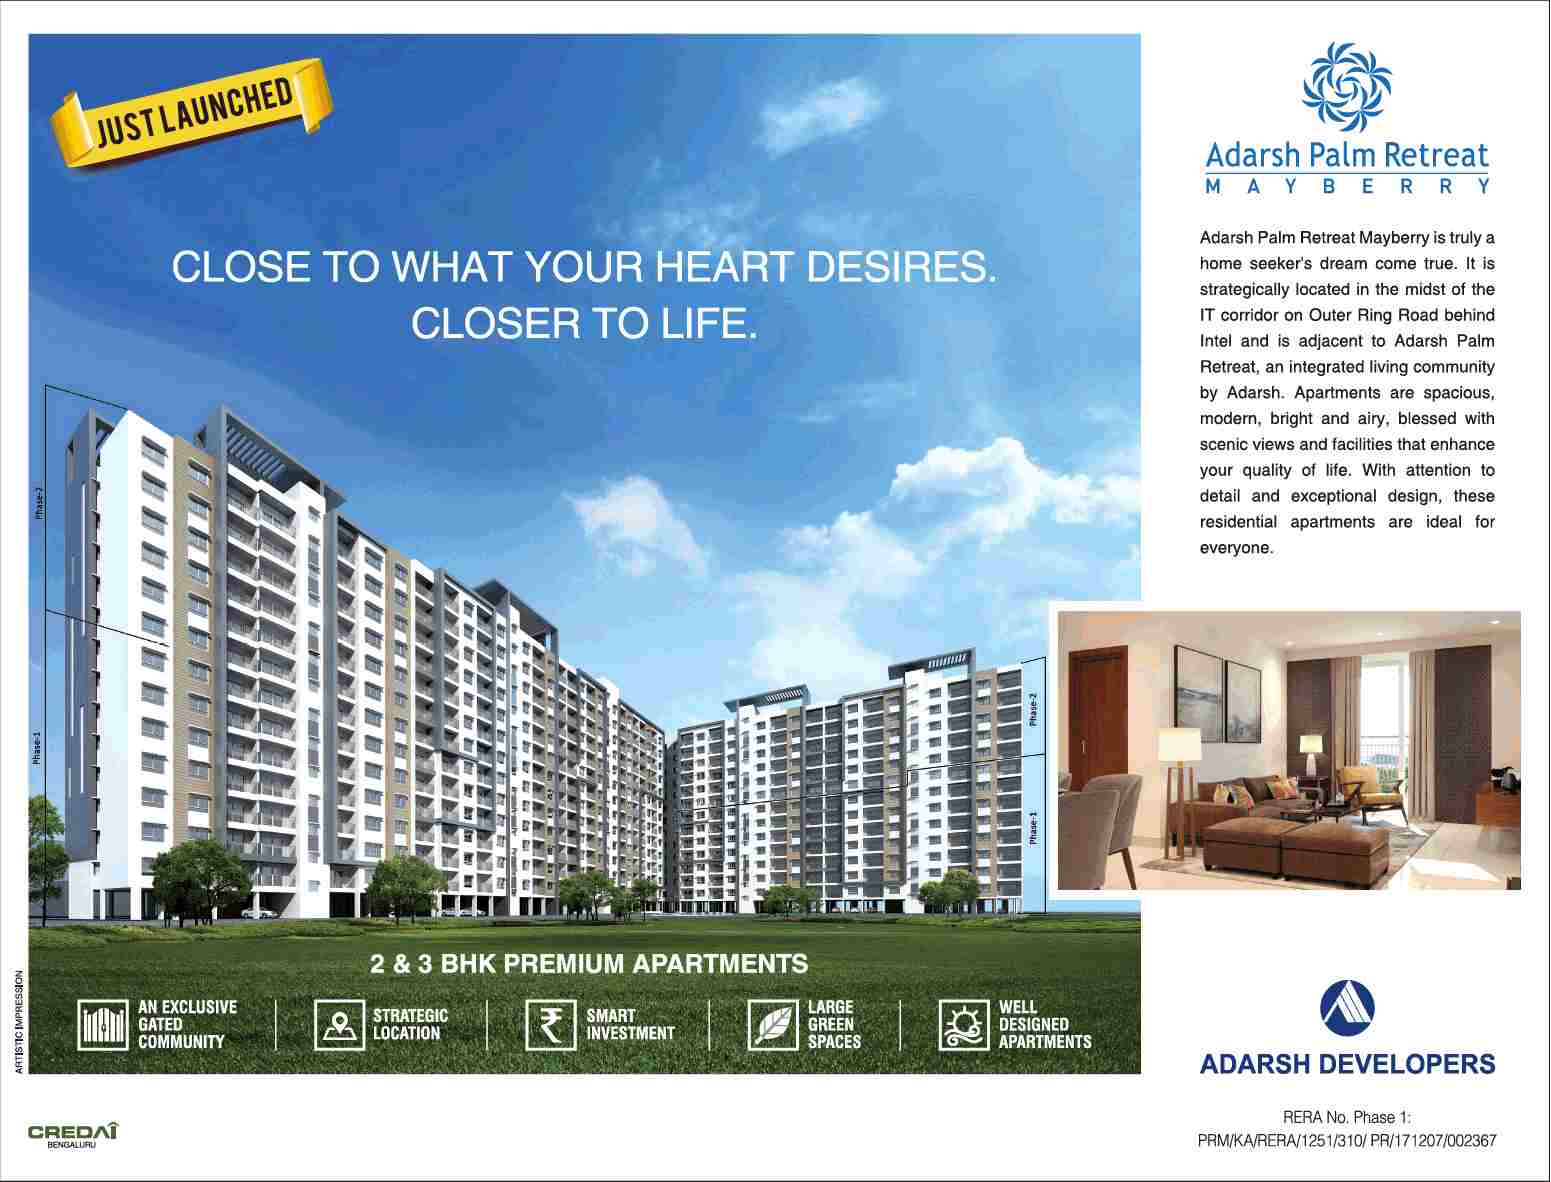 Book 2 & 3 BHK premium apartments at Adarsh Palm Retreat Mayberry in Bangalore